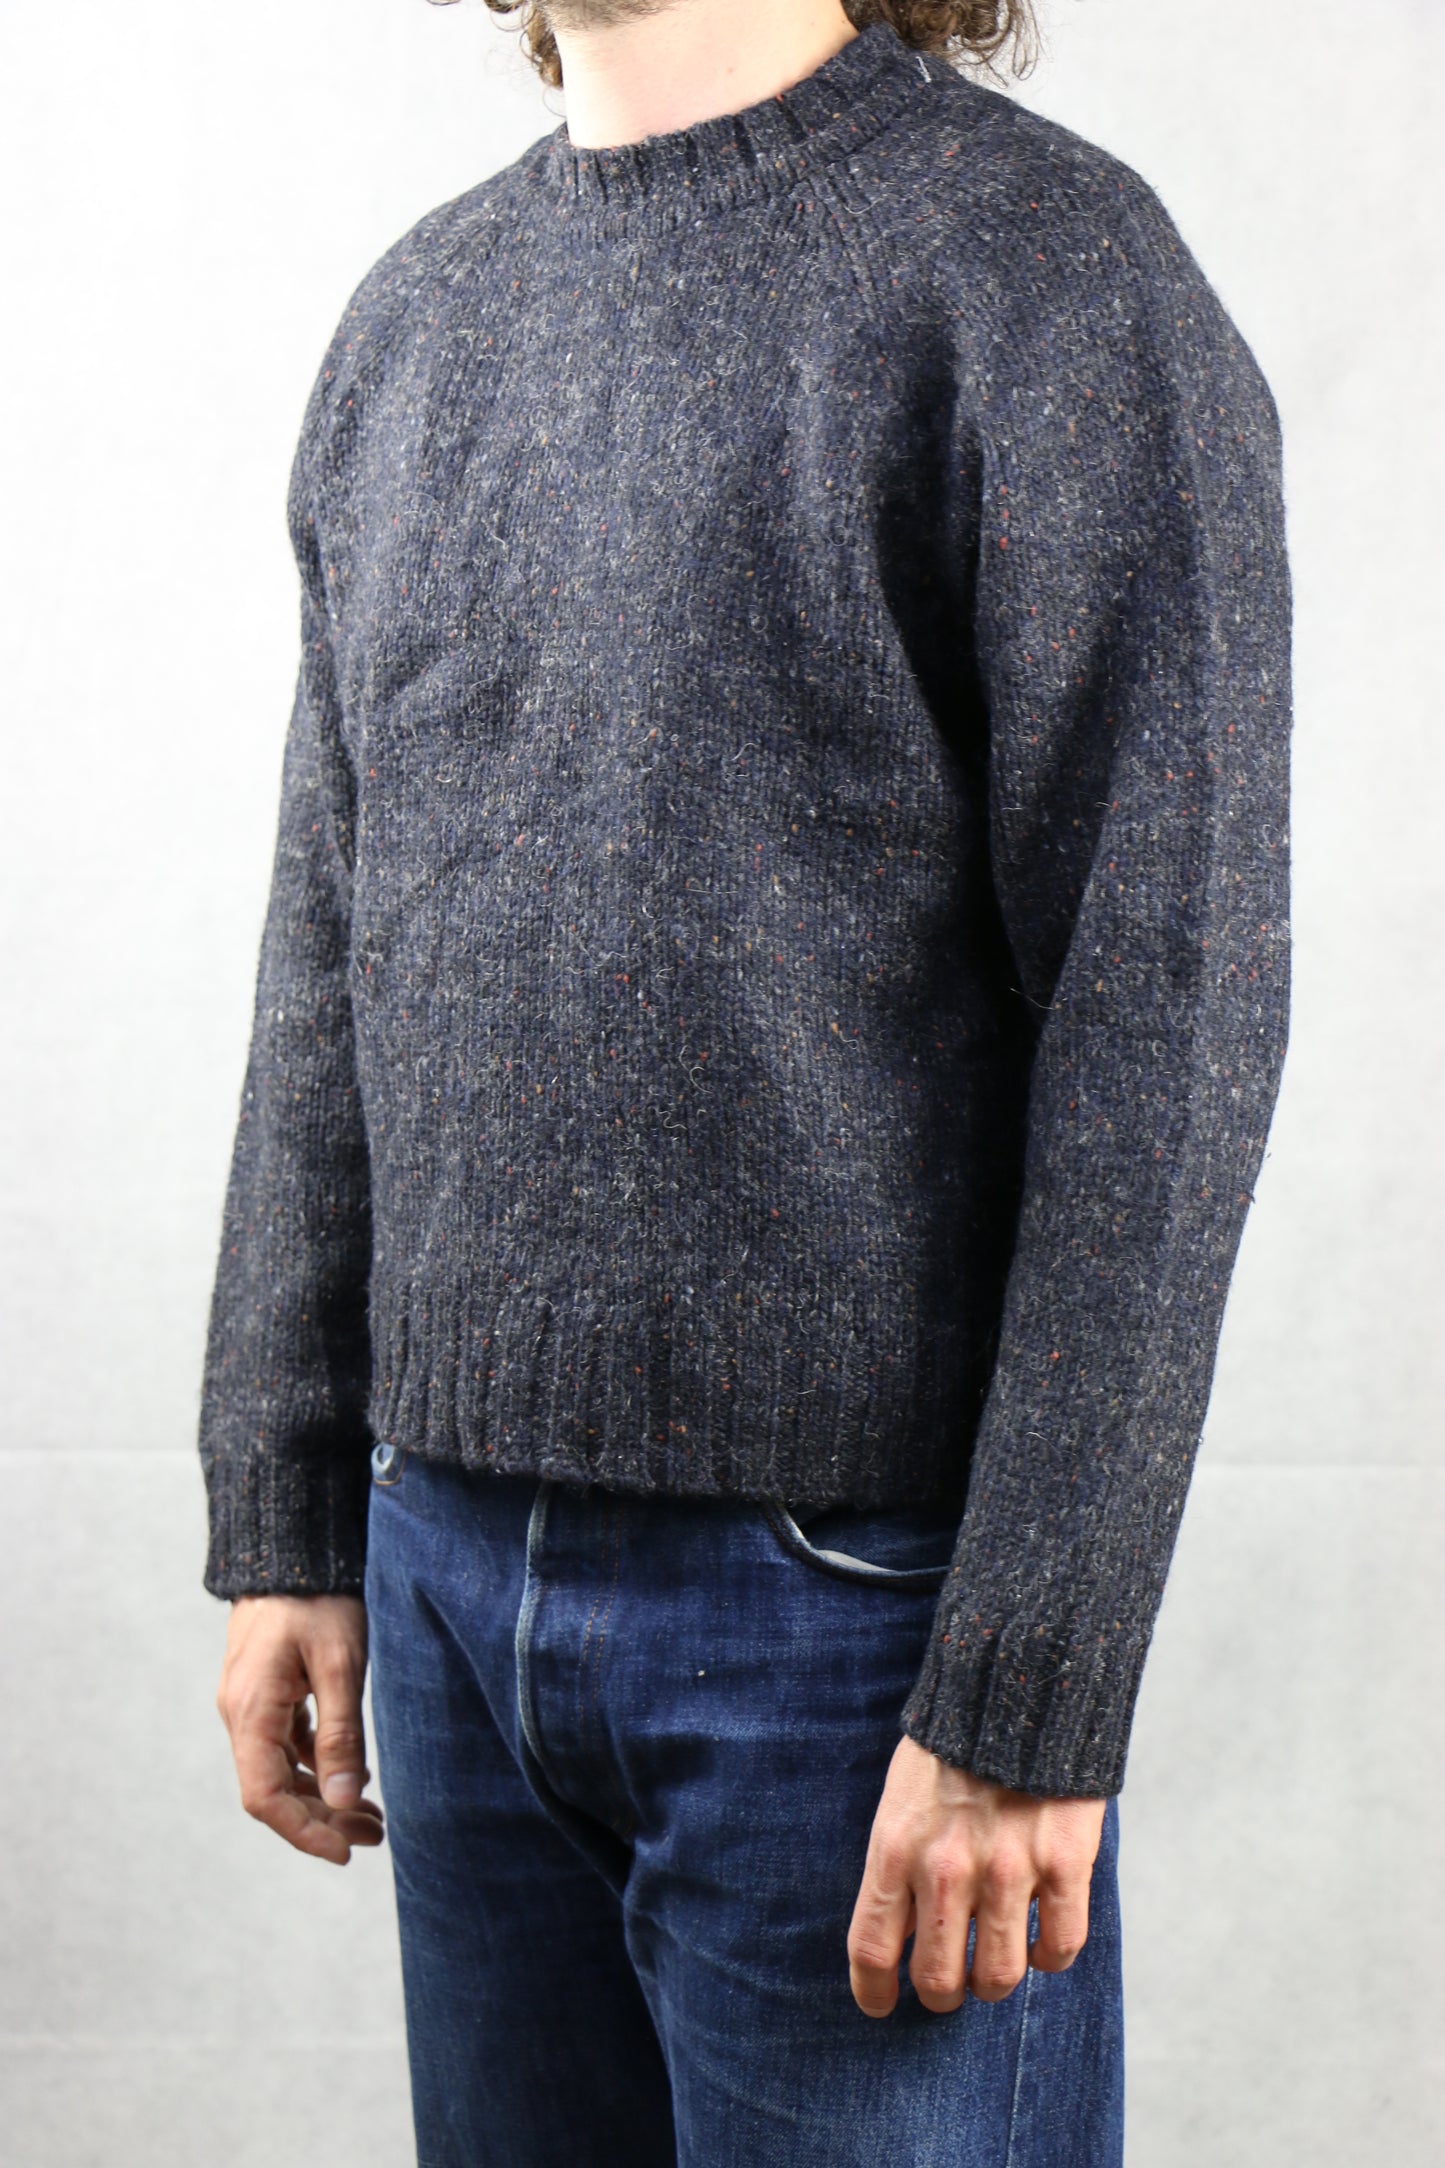 Abercrombie & Fitch Sweater - vintage clothing clochard92.com